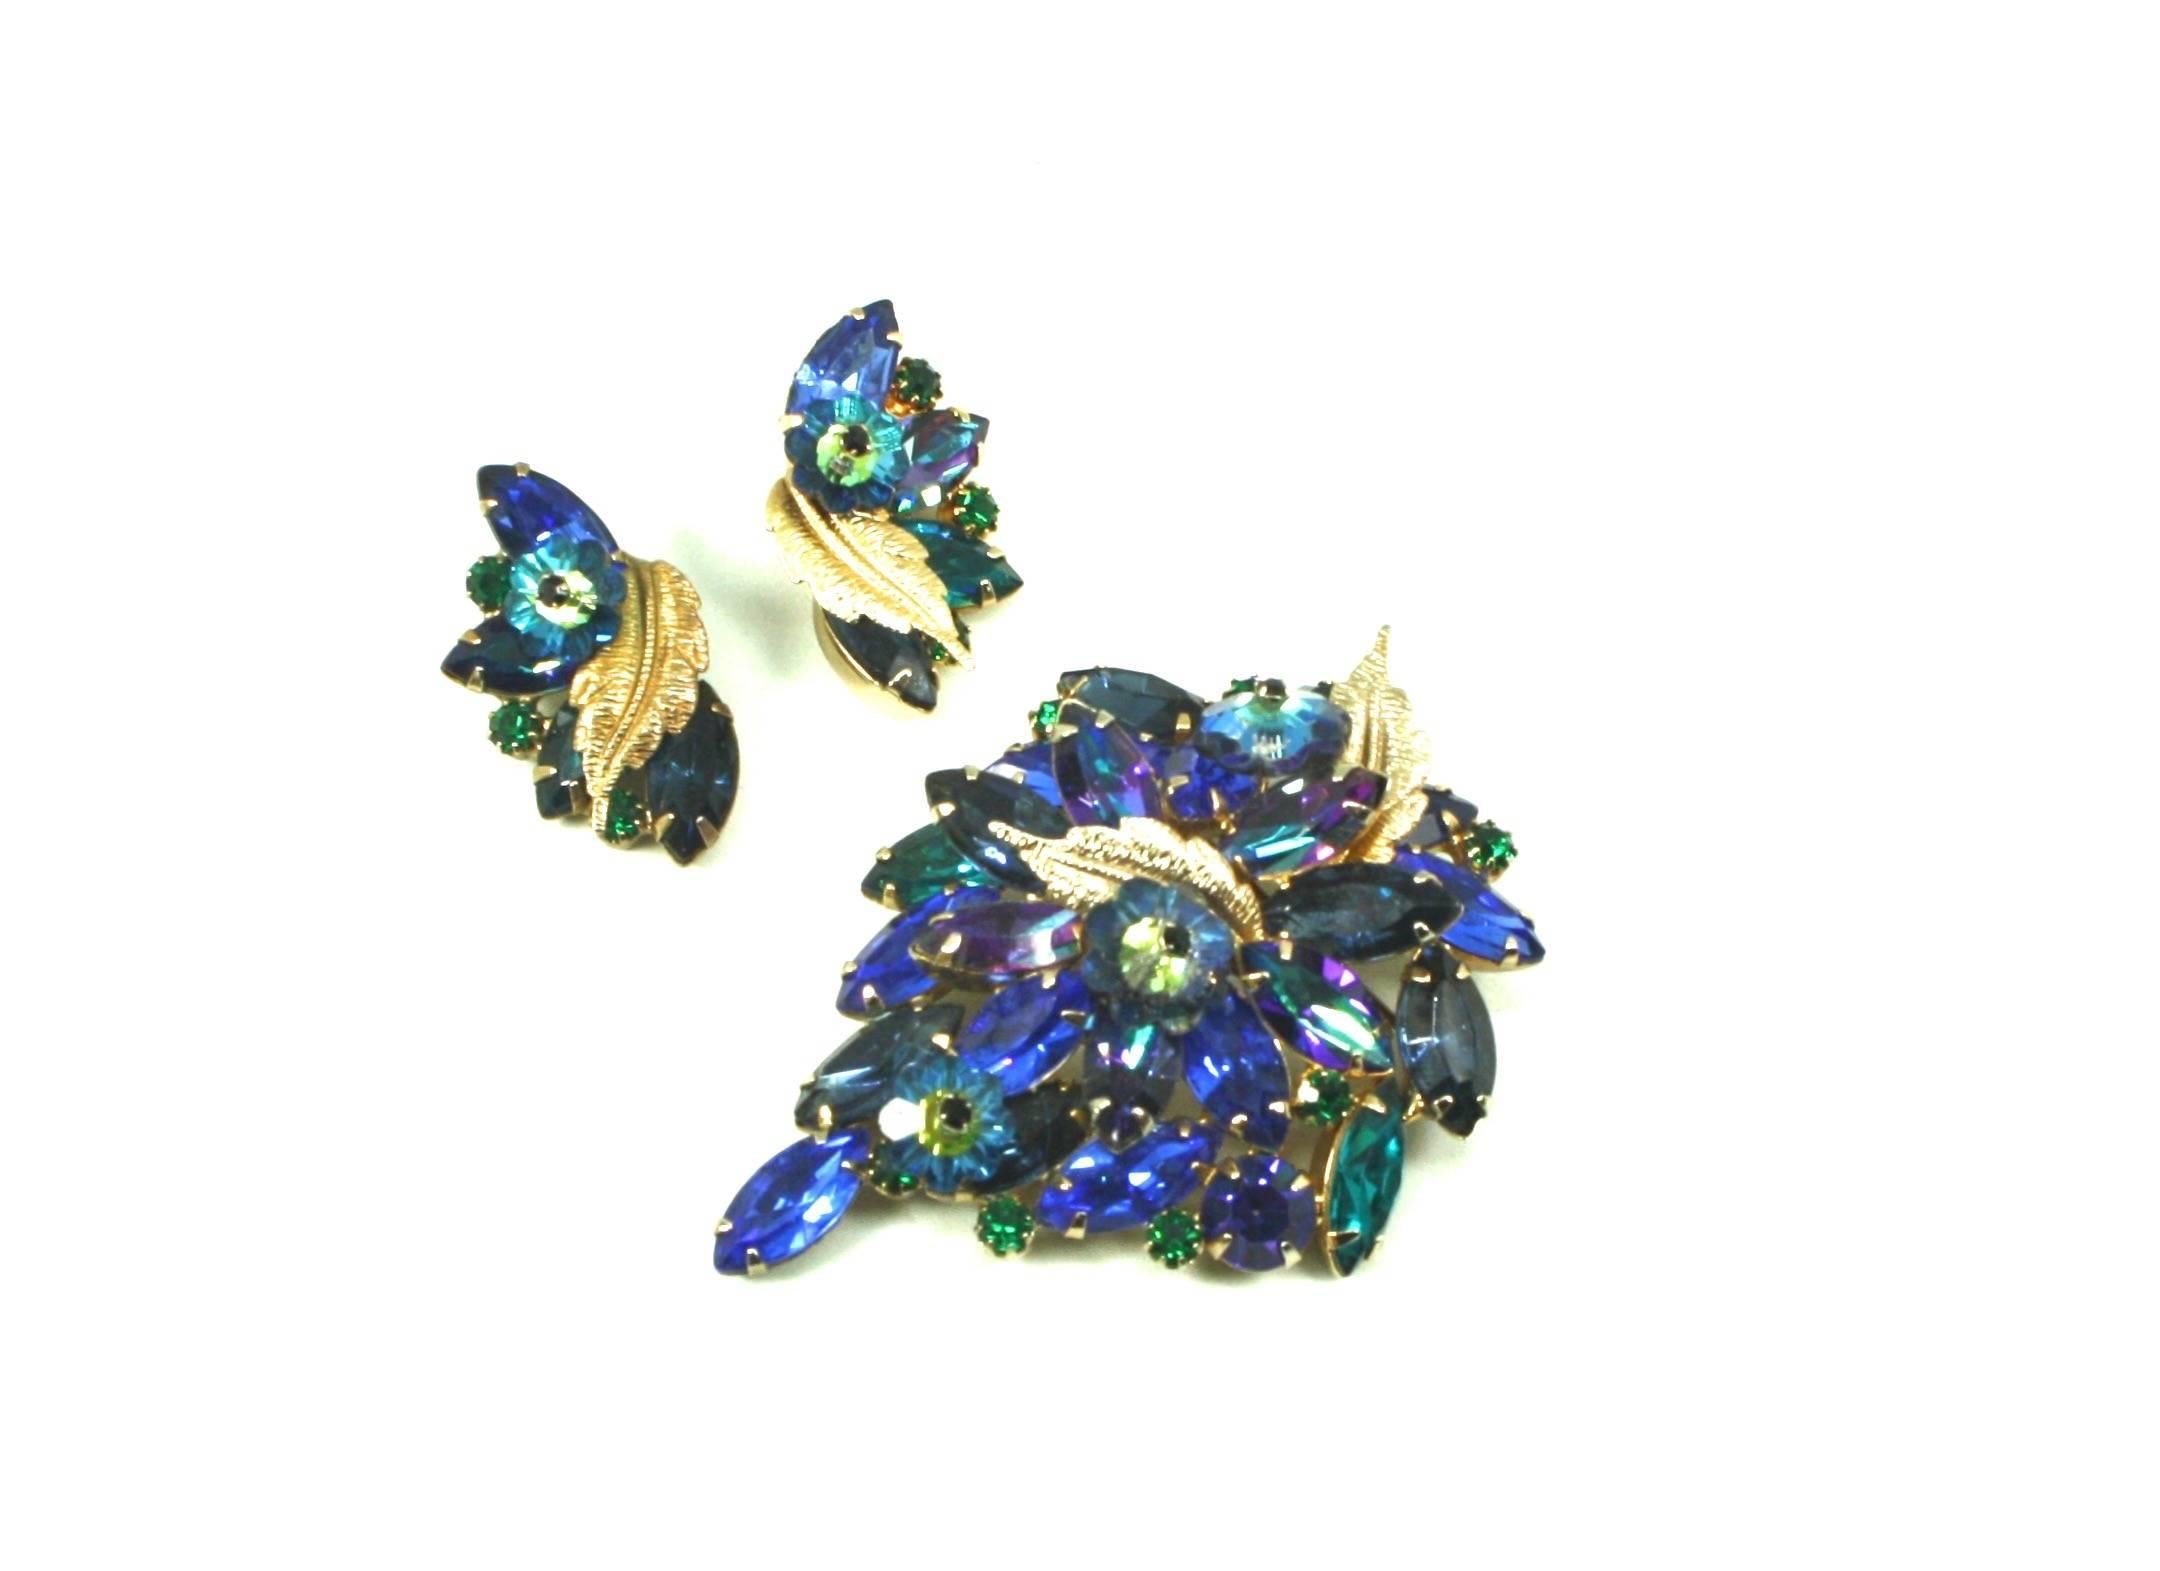 Exquisite floral themed brooch and clip earrings suite by American fashion model turned jewellery maker Alice Caviness. Glass stones are claw-set in hues of blue, green and purple. Measurements below are for the brooch. Measurements for the clip